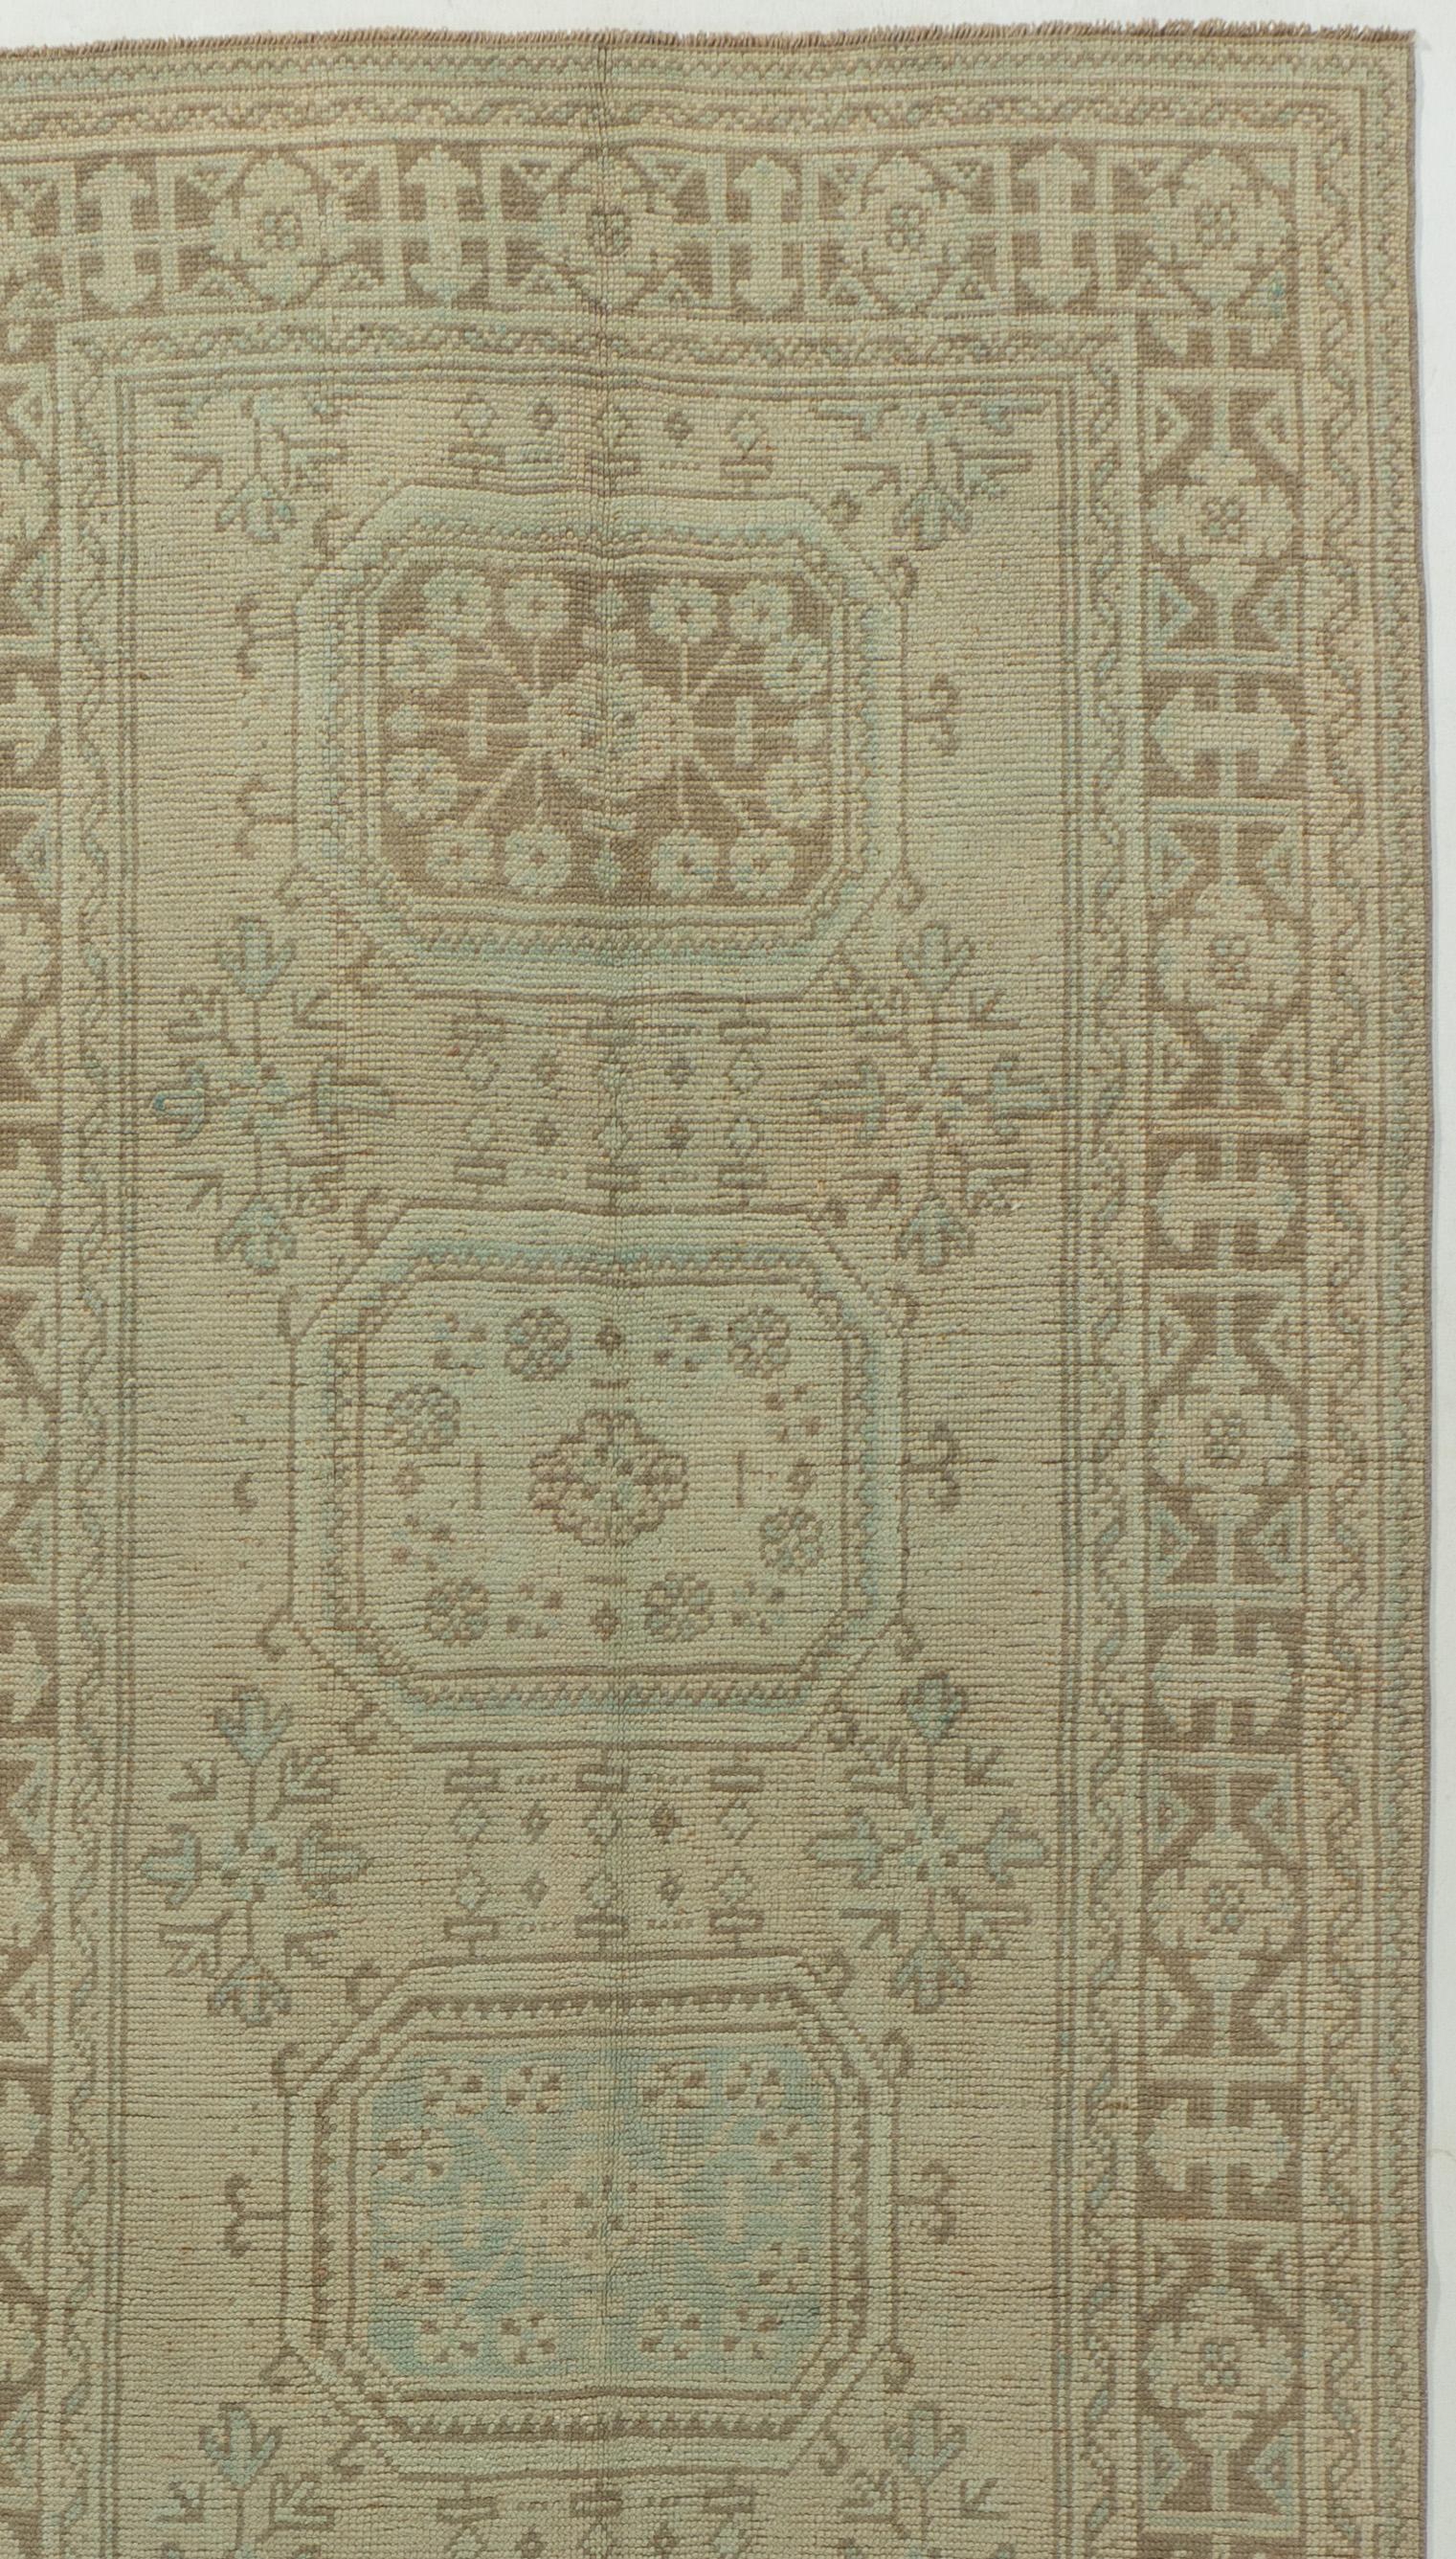 Vintage Turkish Oushak Runner 4'4 x 11'11. The luxurious quality of the wool (for which Oushaks have always been famous) contributed to the vibrancy of the colors. Unlike most Turkish rugs, Oushak rugs were heavily influenced by Persian design. Many